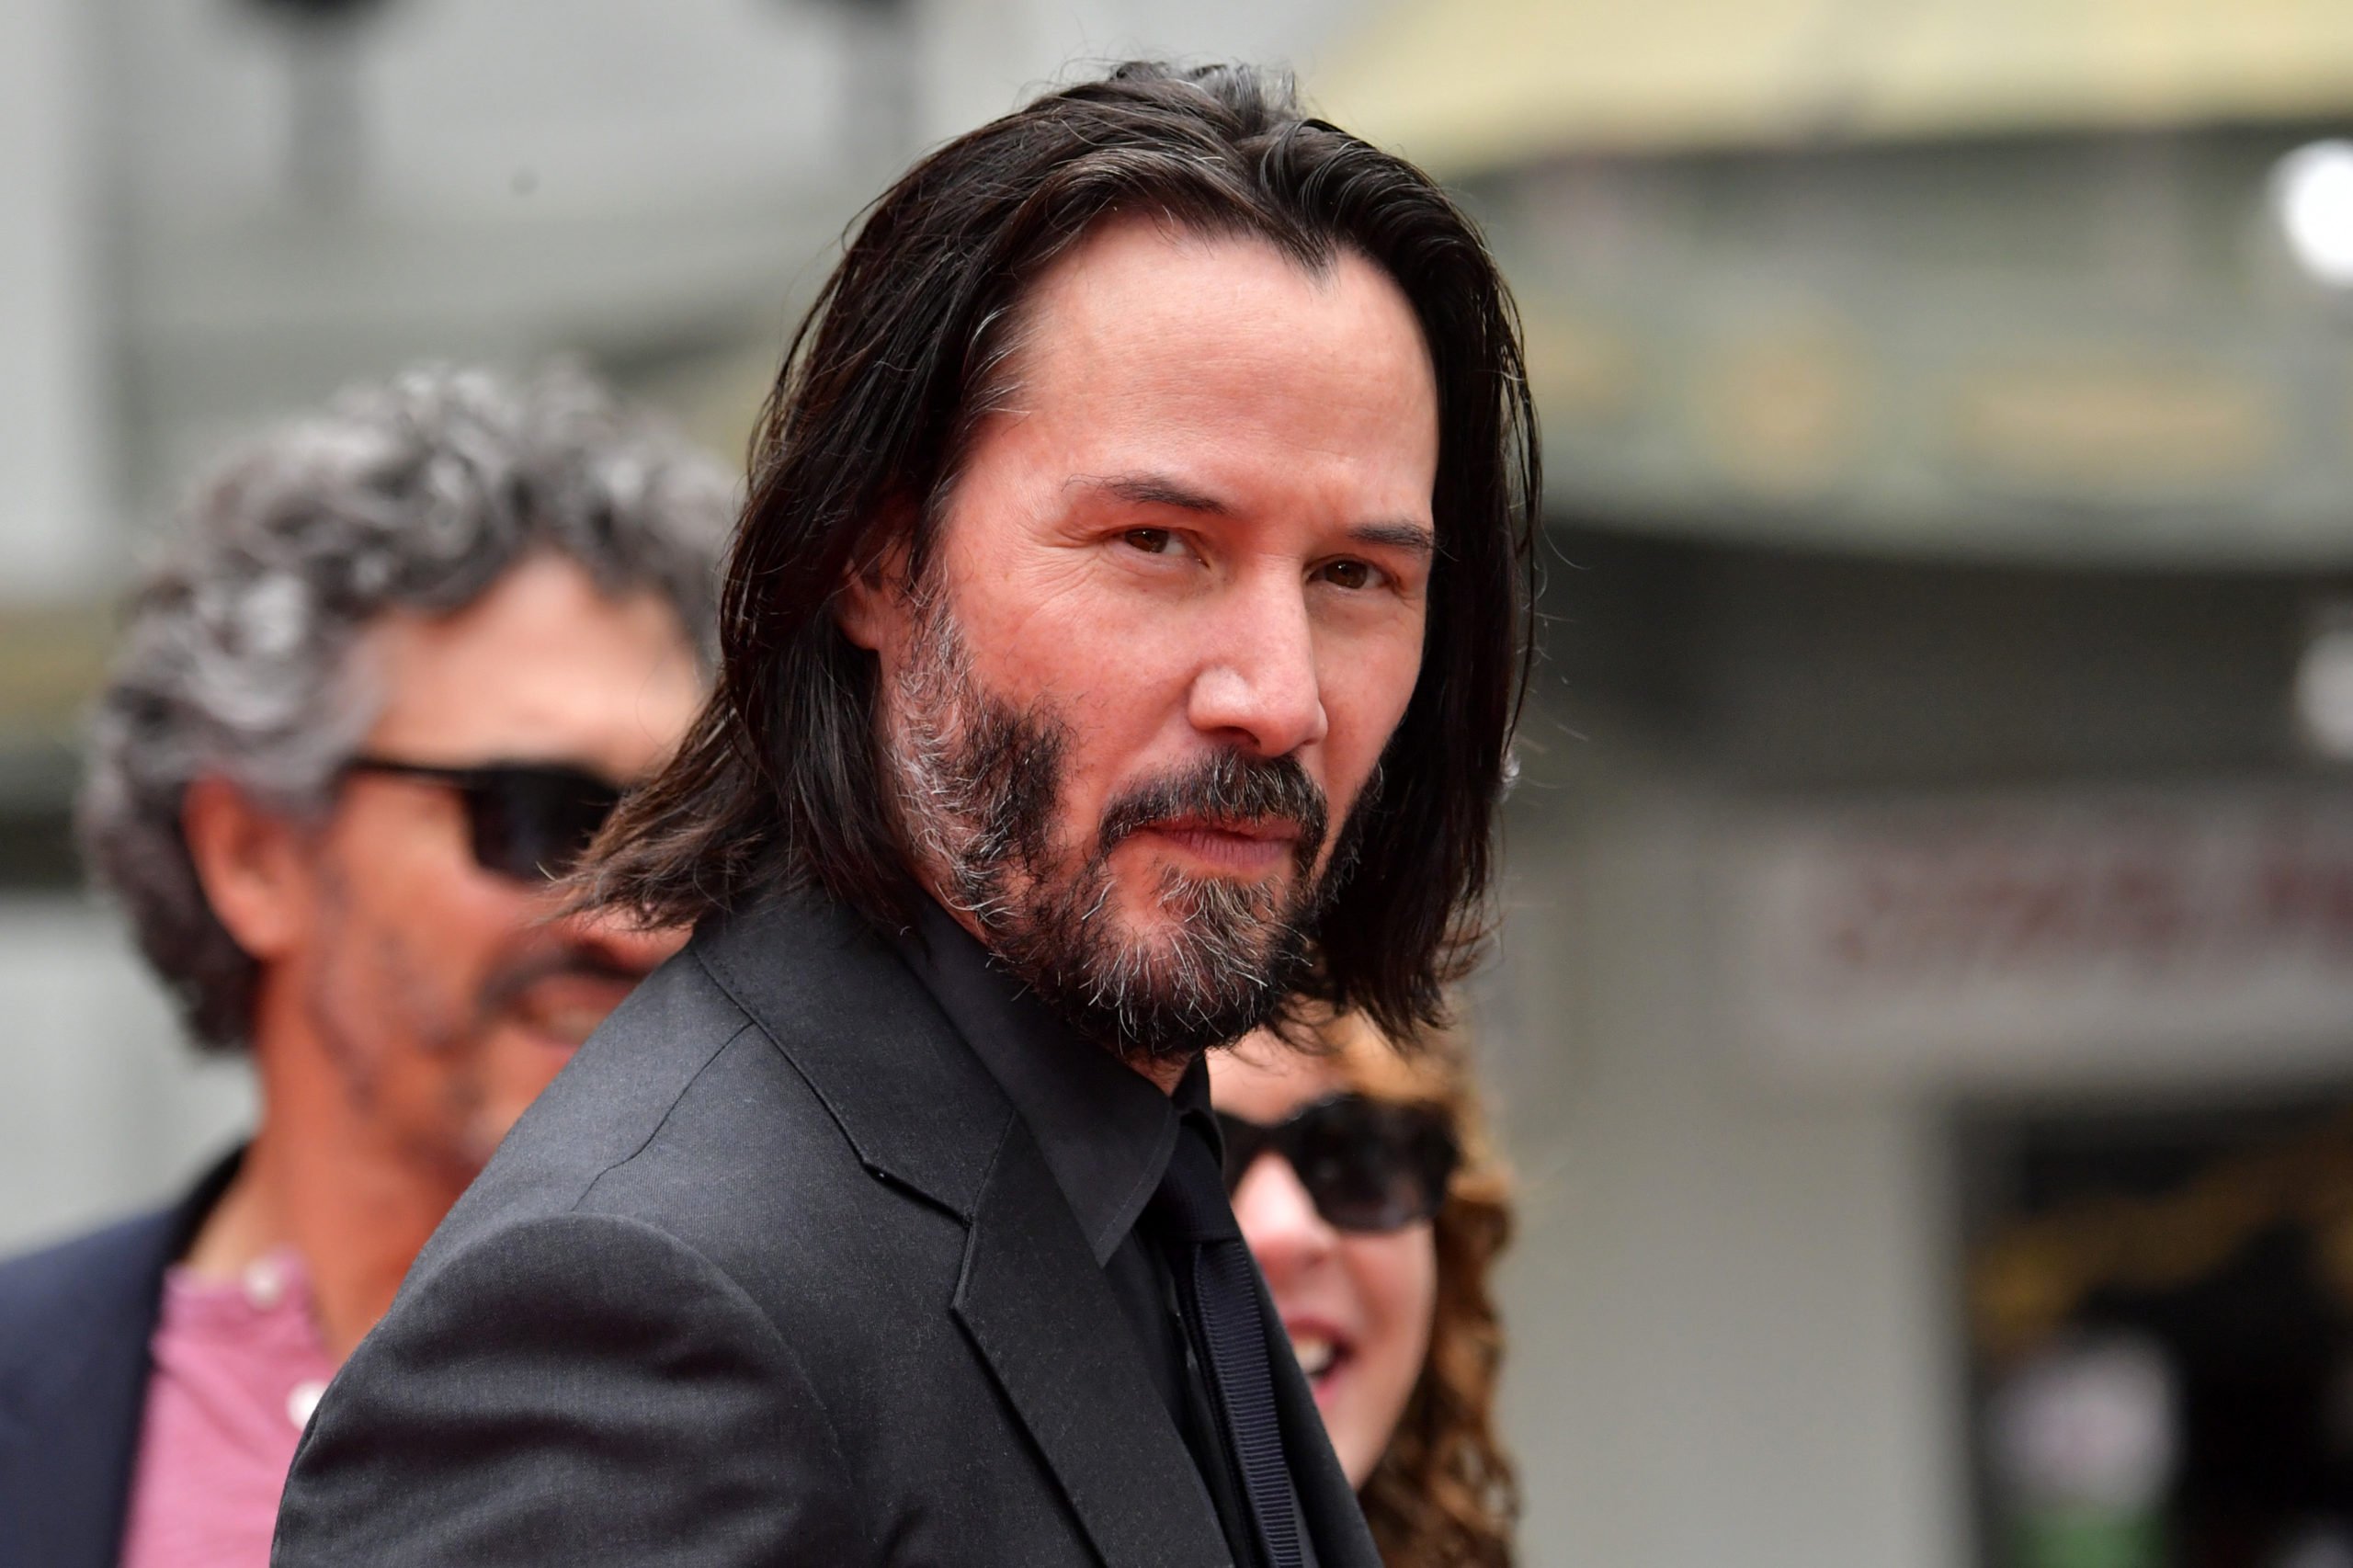 keanu reeves offers virtual date for charity